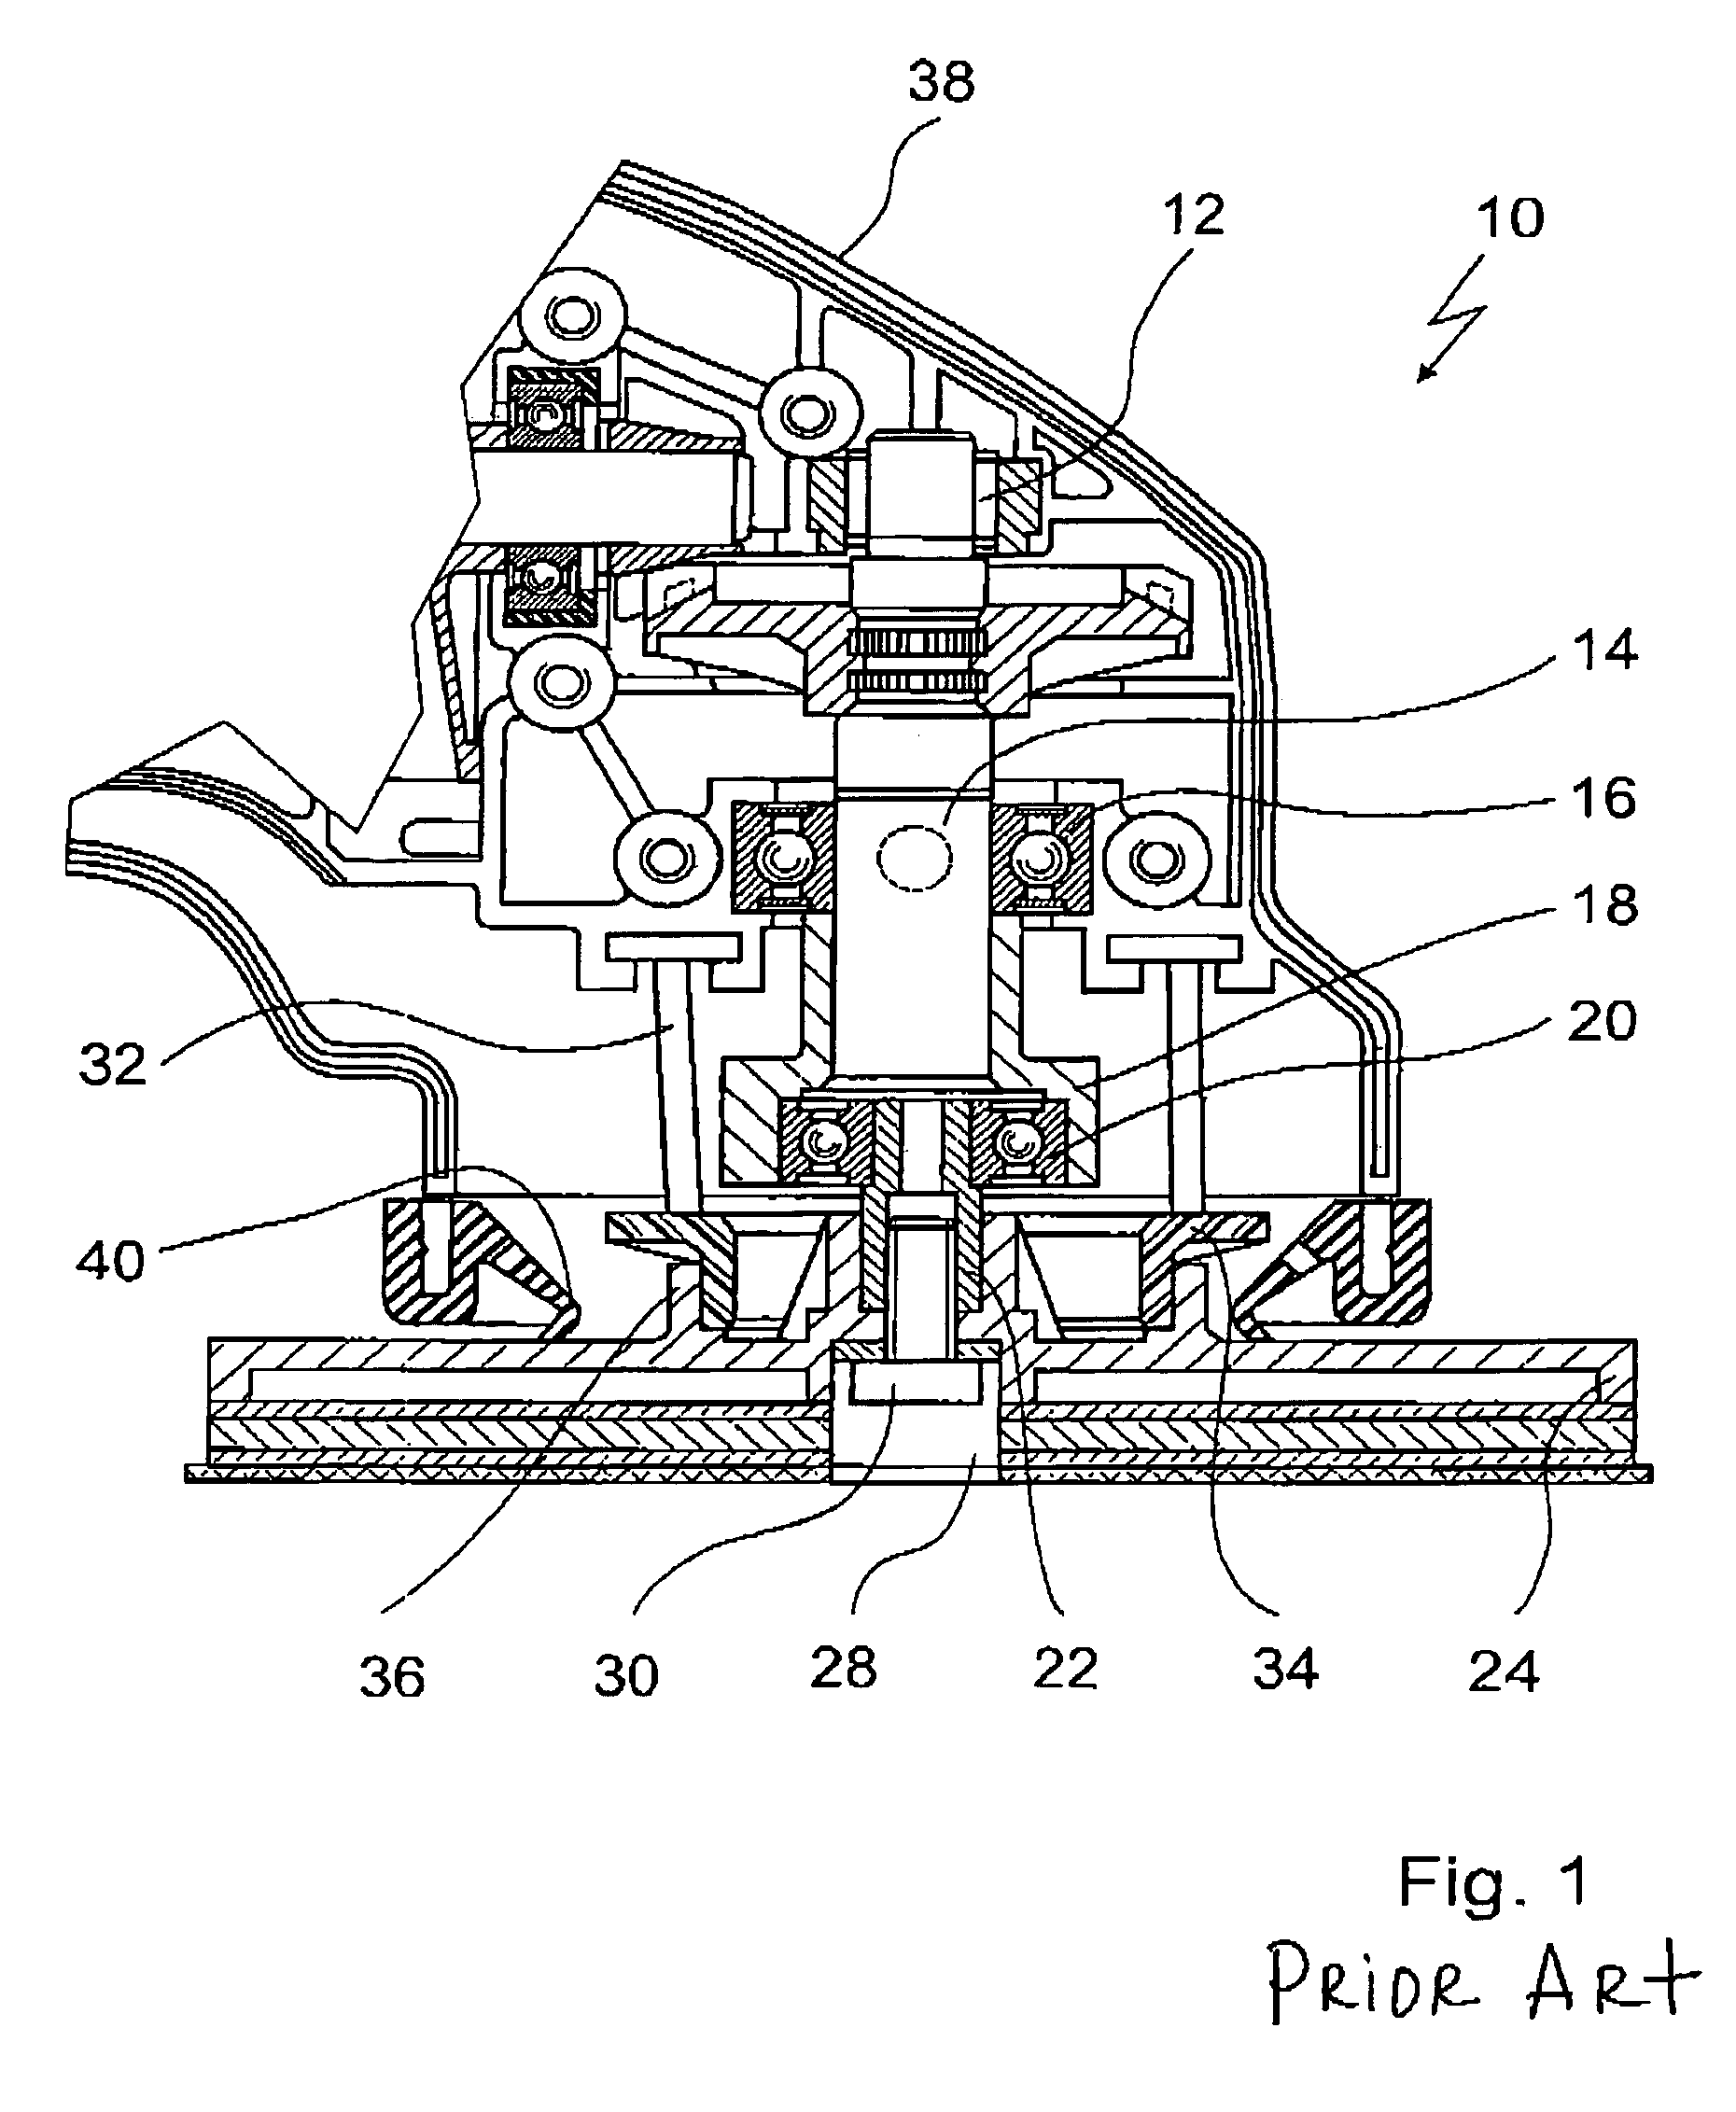 Bearing arrangement for vibrationally mounting a grinding disk in a grinder